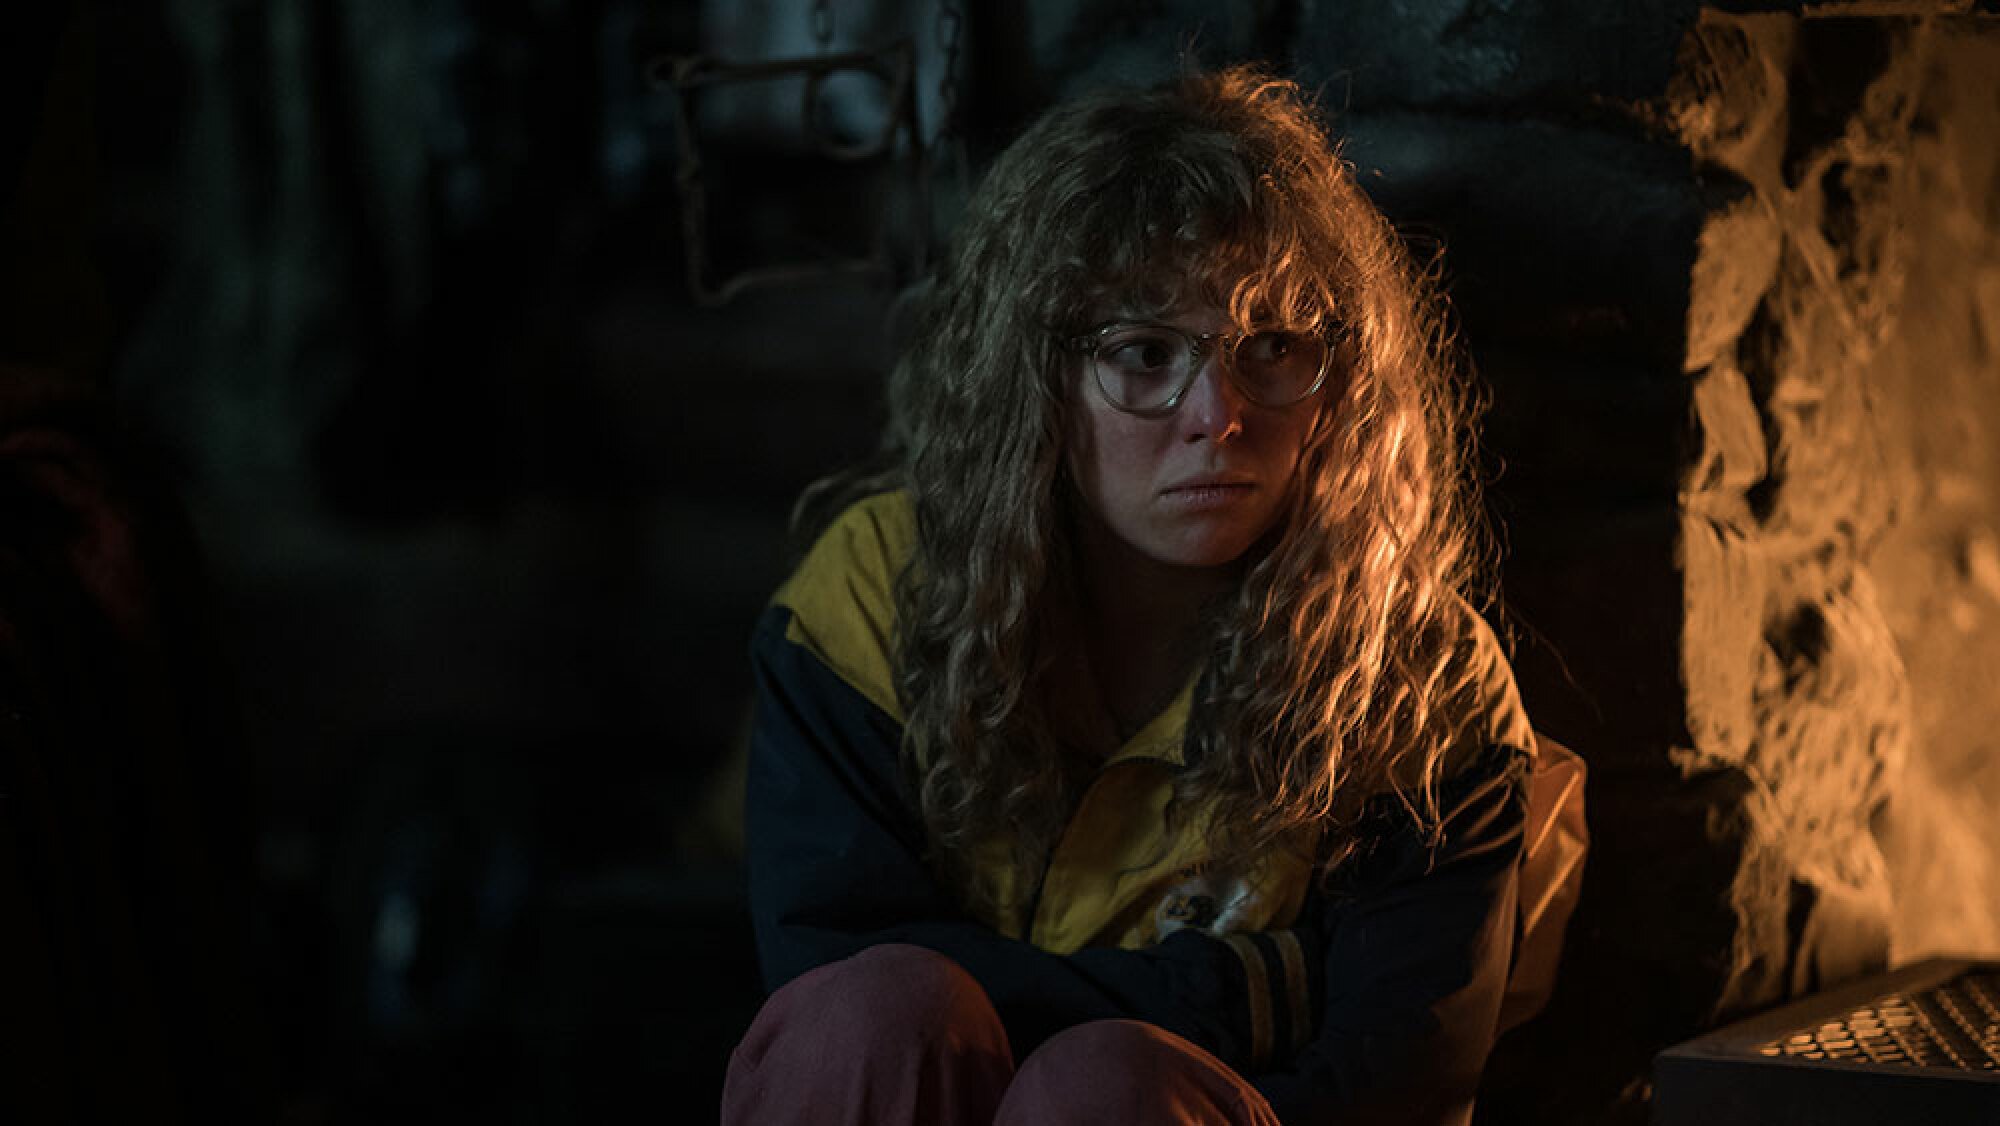 A girl with glasses and frizzy blonde hair sits by a fireplace.